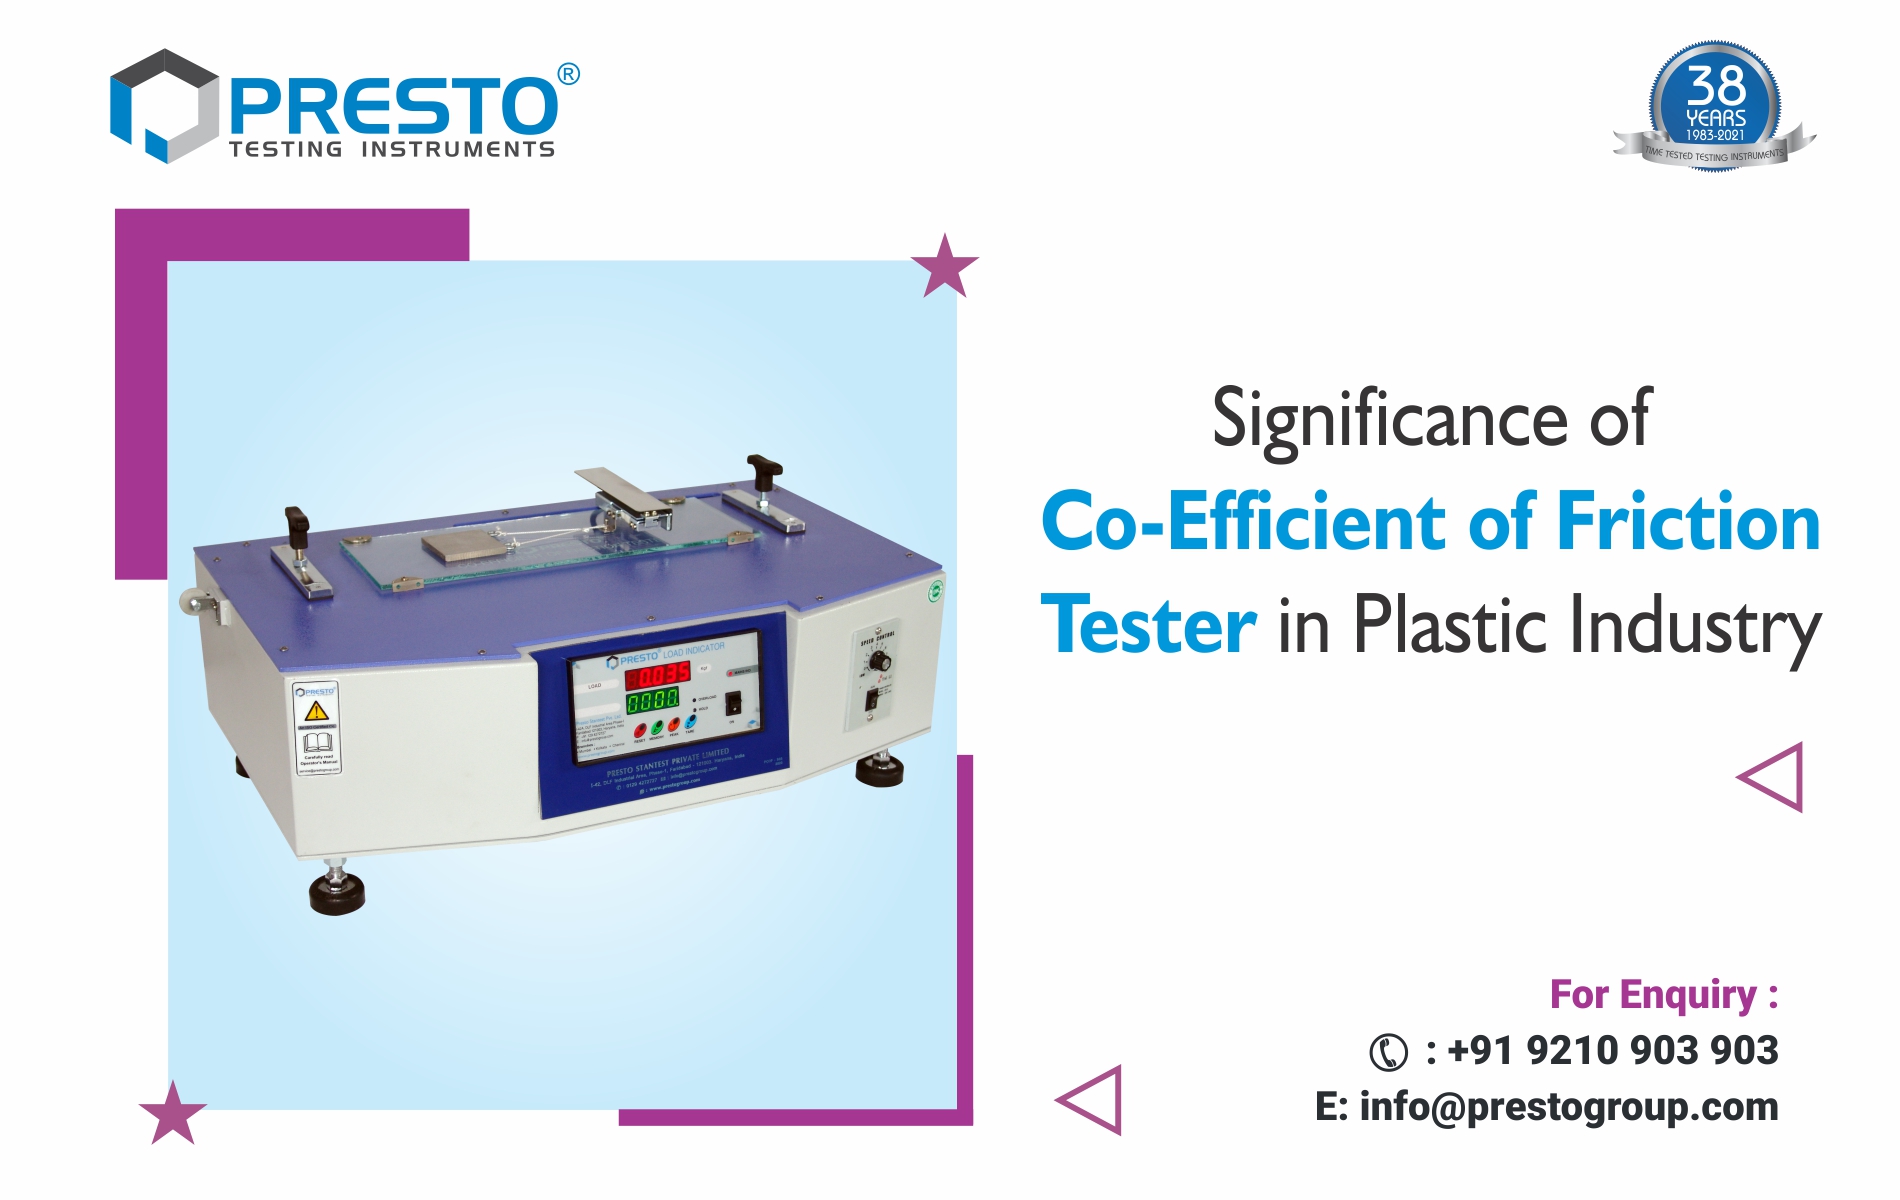 Significance of Co-Efficient of Friction Tester in Plastic Industry